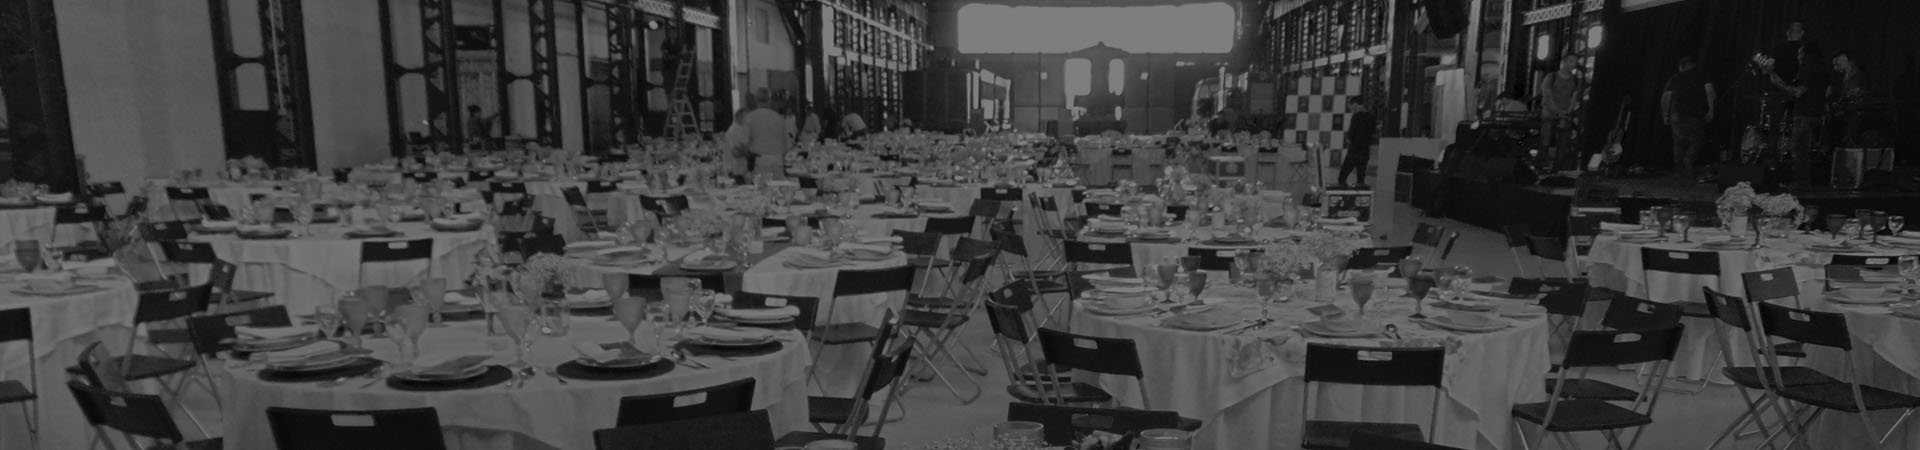 Photo of Oficina do Vapor with tables and chairs prepared to host a banquet